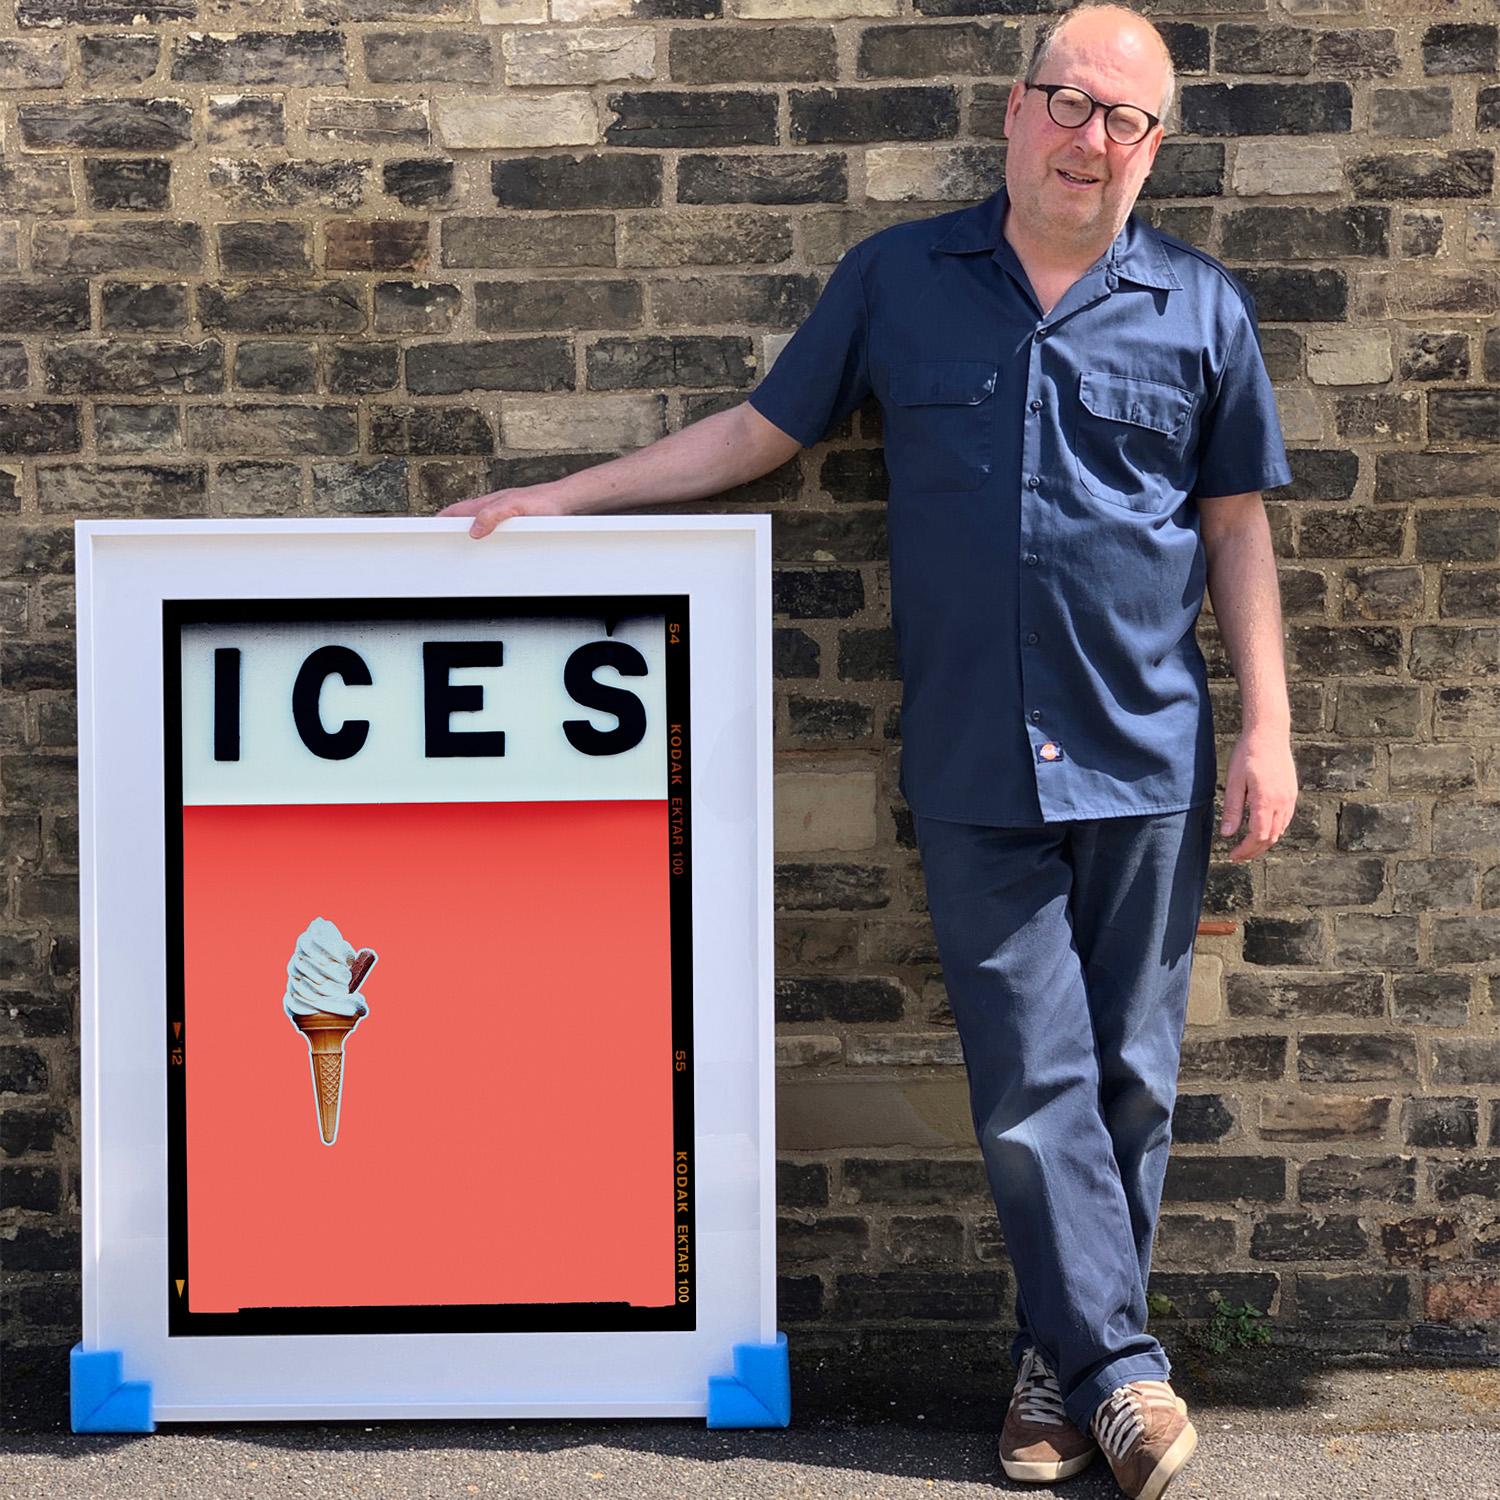 ICES, by Richard Heeps, photographed at the British Seaside at the end of summer 2020. This artwork is about evoking memories of the simple joy of days by the beach. The coral orange Melondrama color blocking, typography and the surreal twist of the